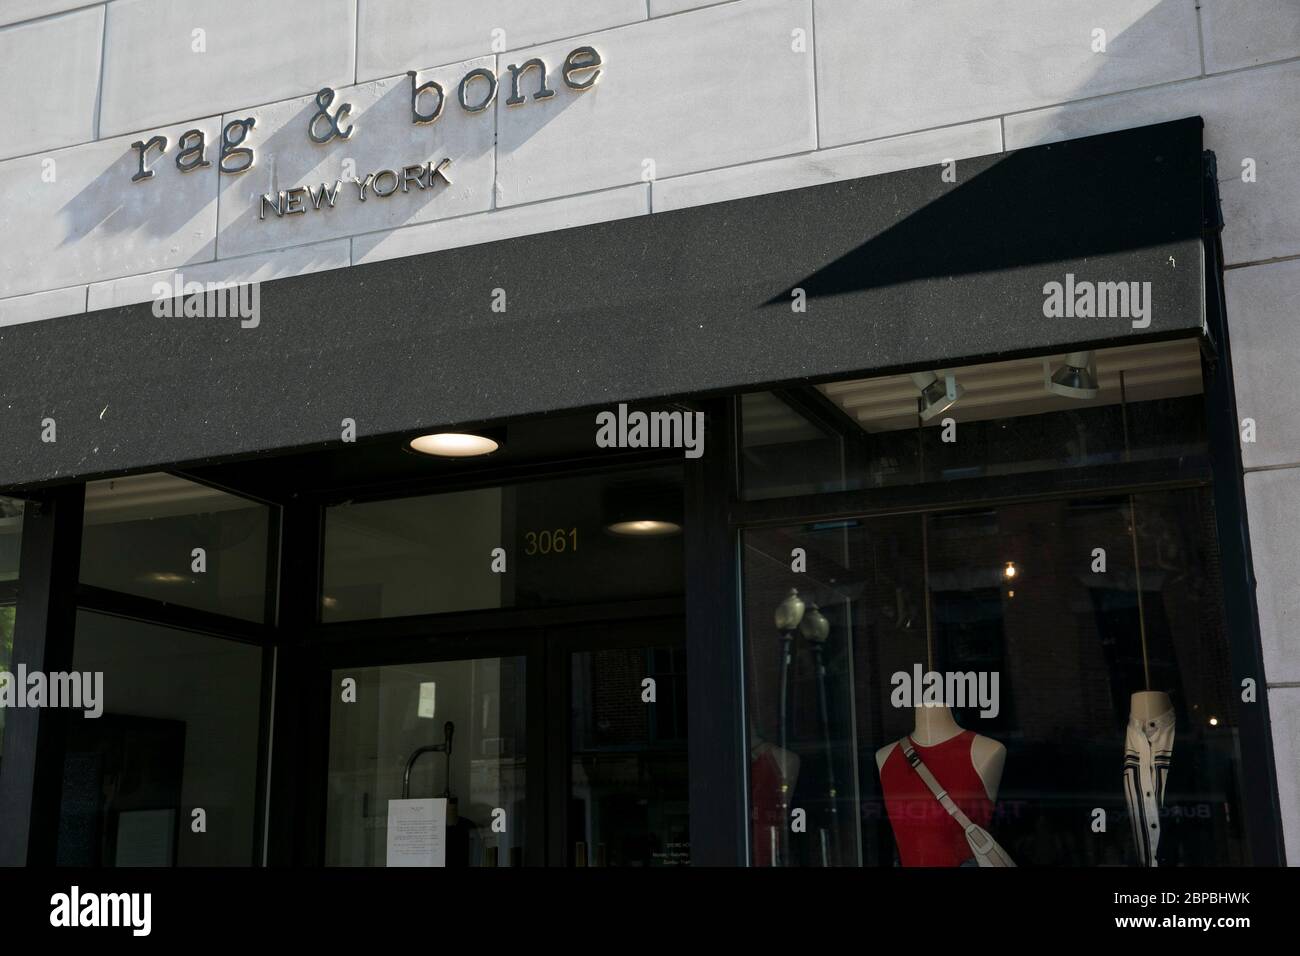 A logo sign outside of a rag & bone retail store location in Washington, D.C., on May 9, 2020. Stock Photo